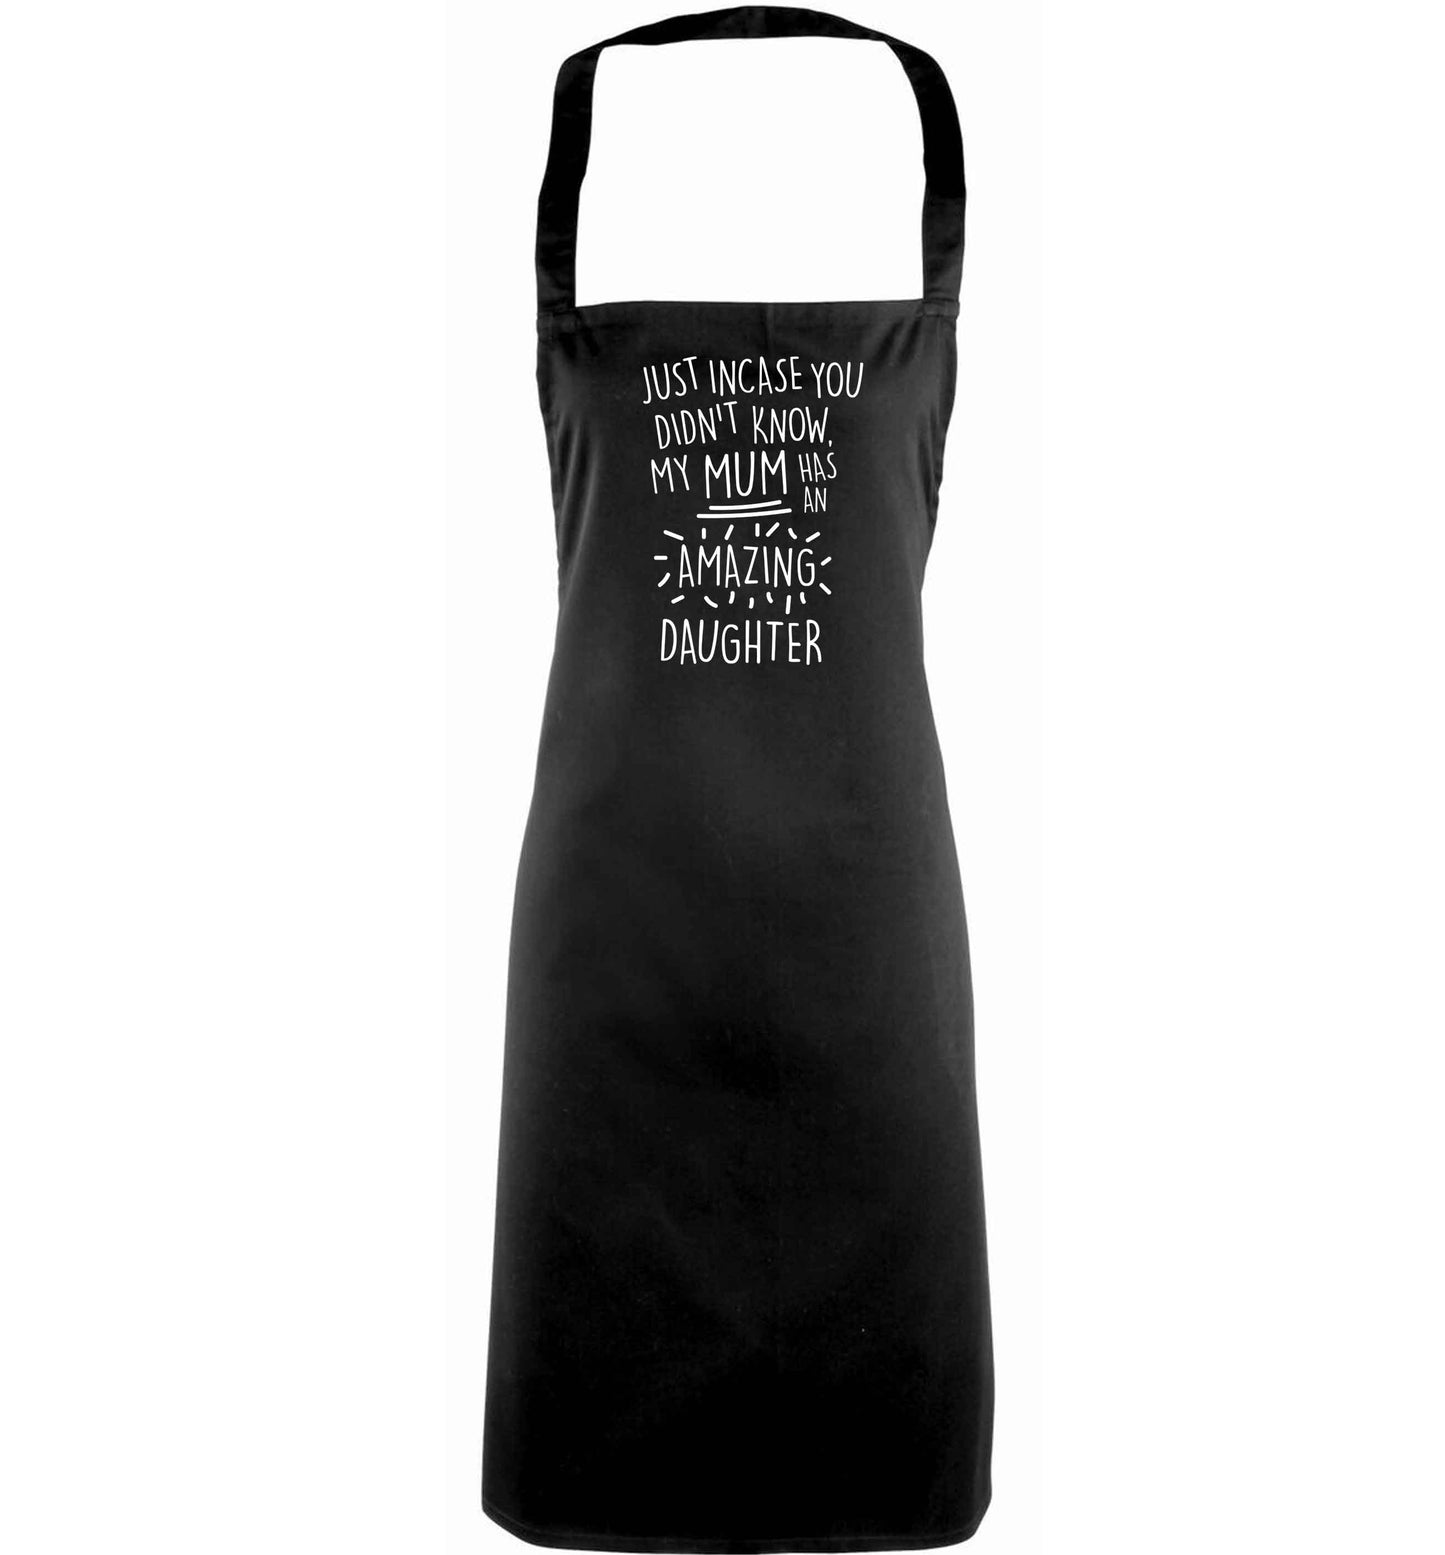 Just incase you didn't know my mum has an amazing daughter adults black apron